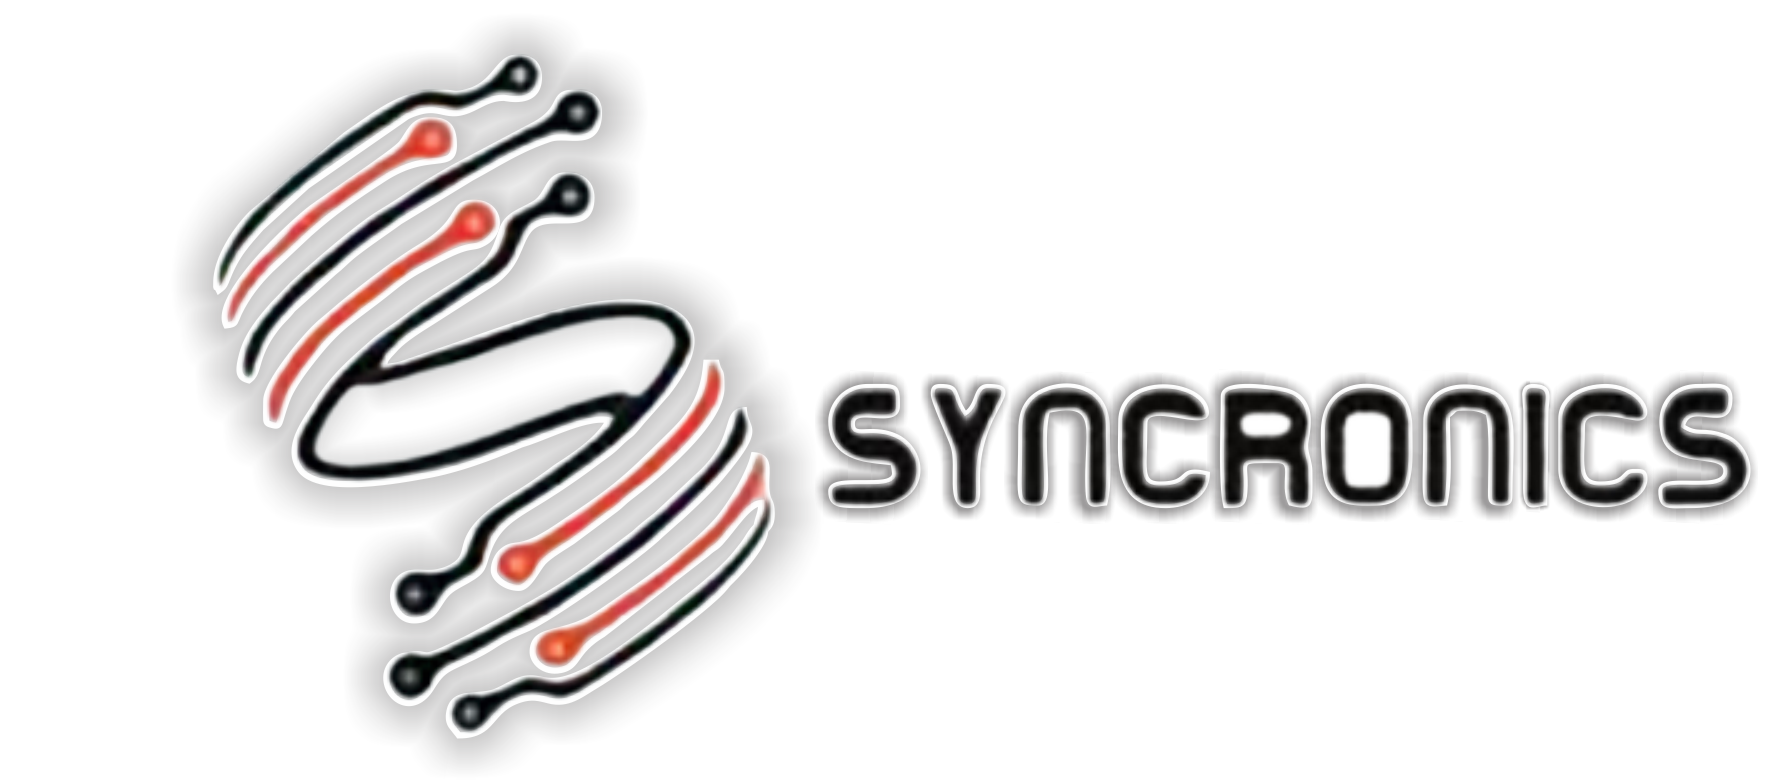 Syncronics Group - Official Subsidiary Site: Syncro Palms